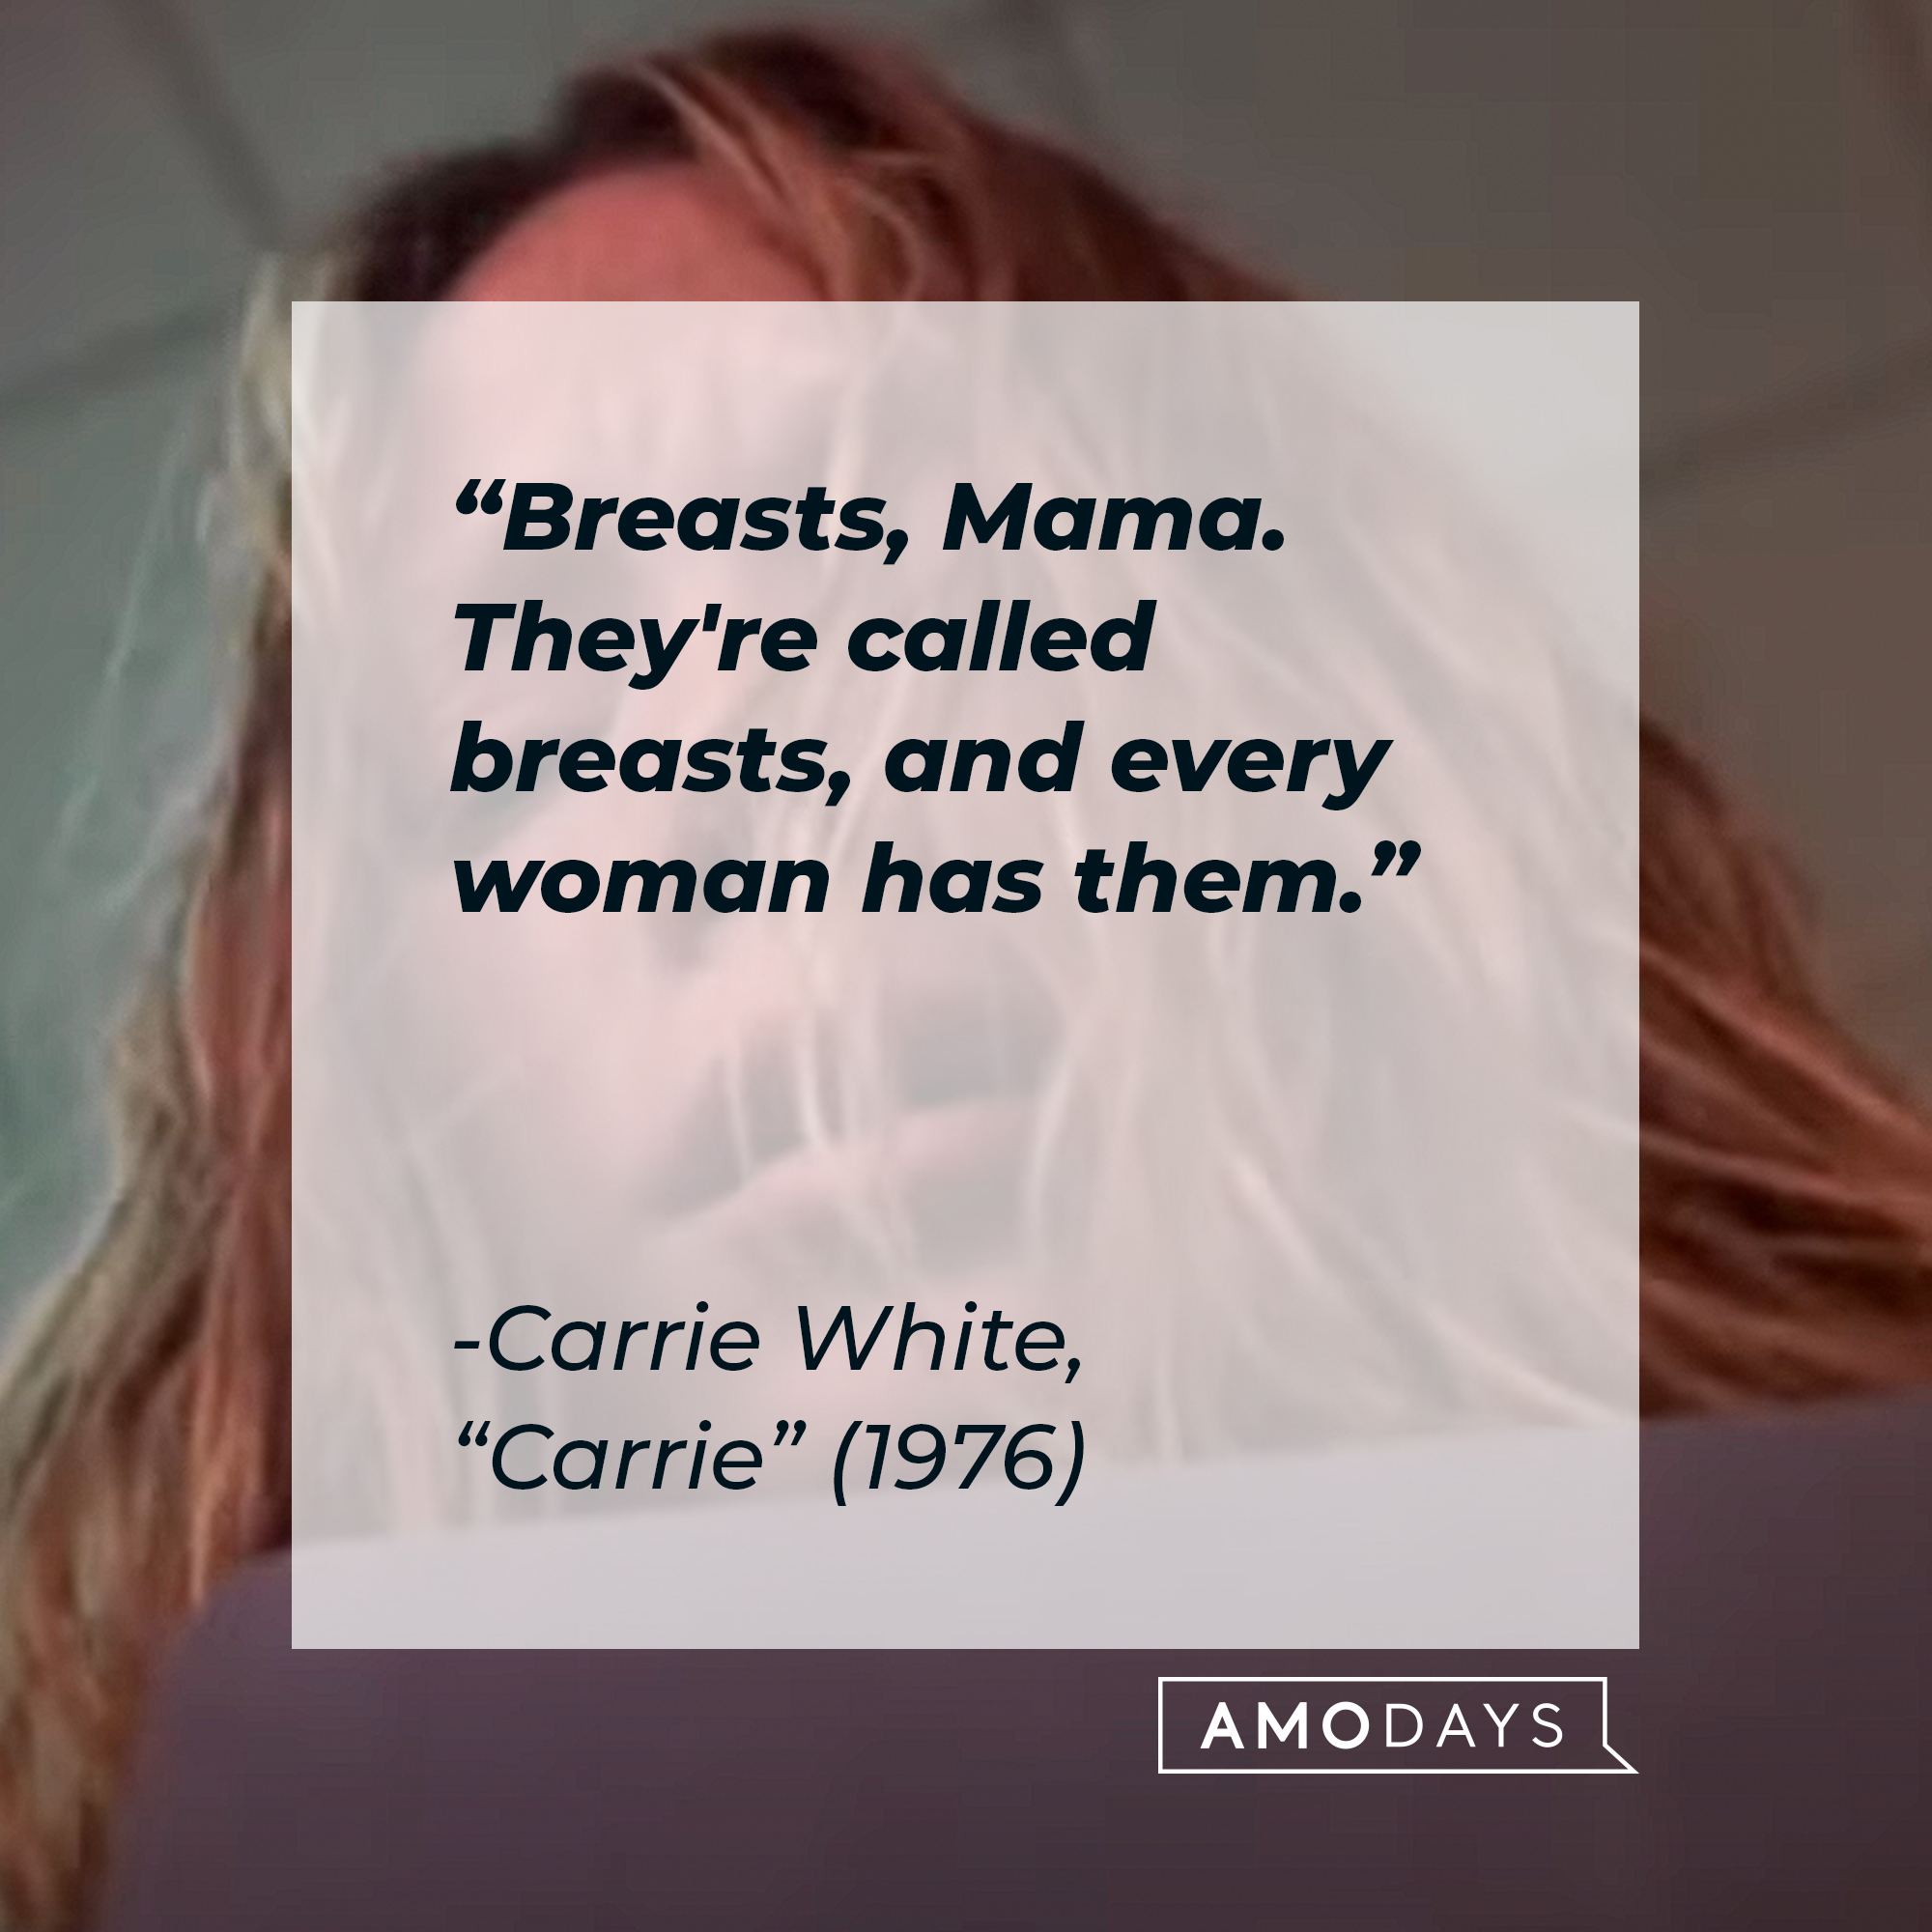 Carrie White's quote: "Breasts, Mama. They're called breasts, and every woman has them." | Source: youtube.com/MGMStudios